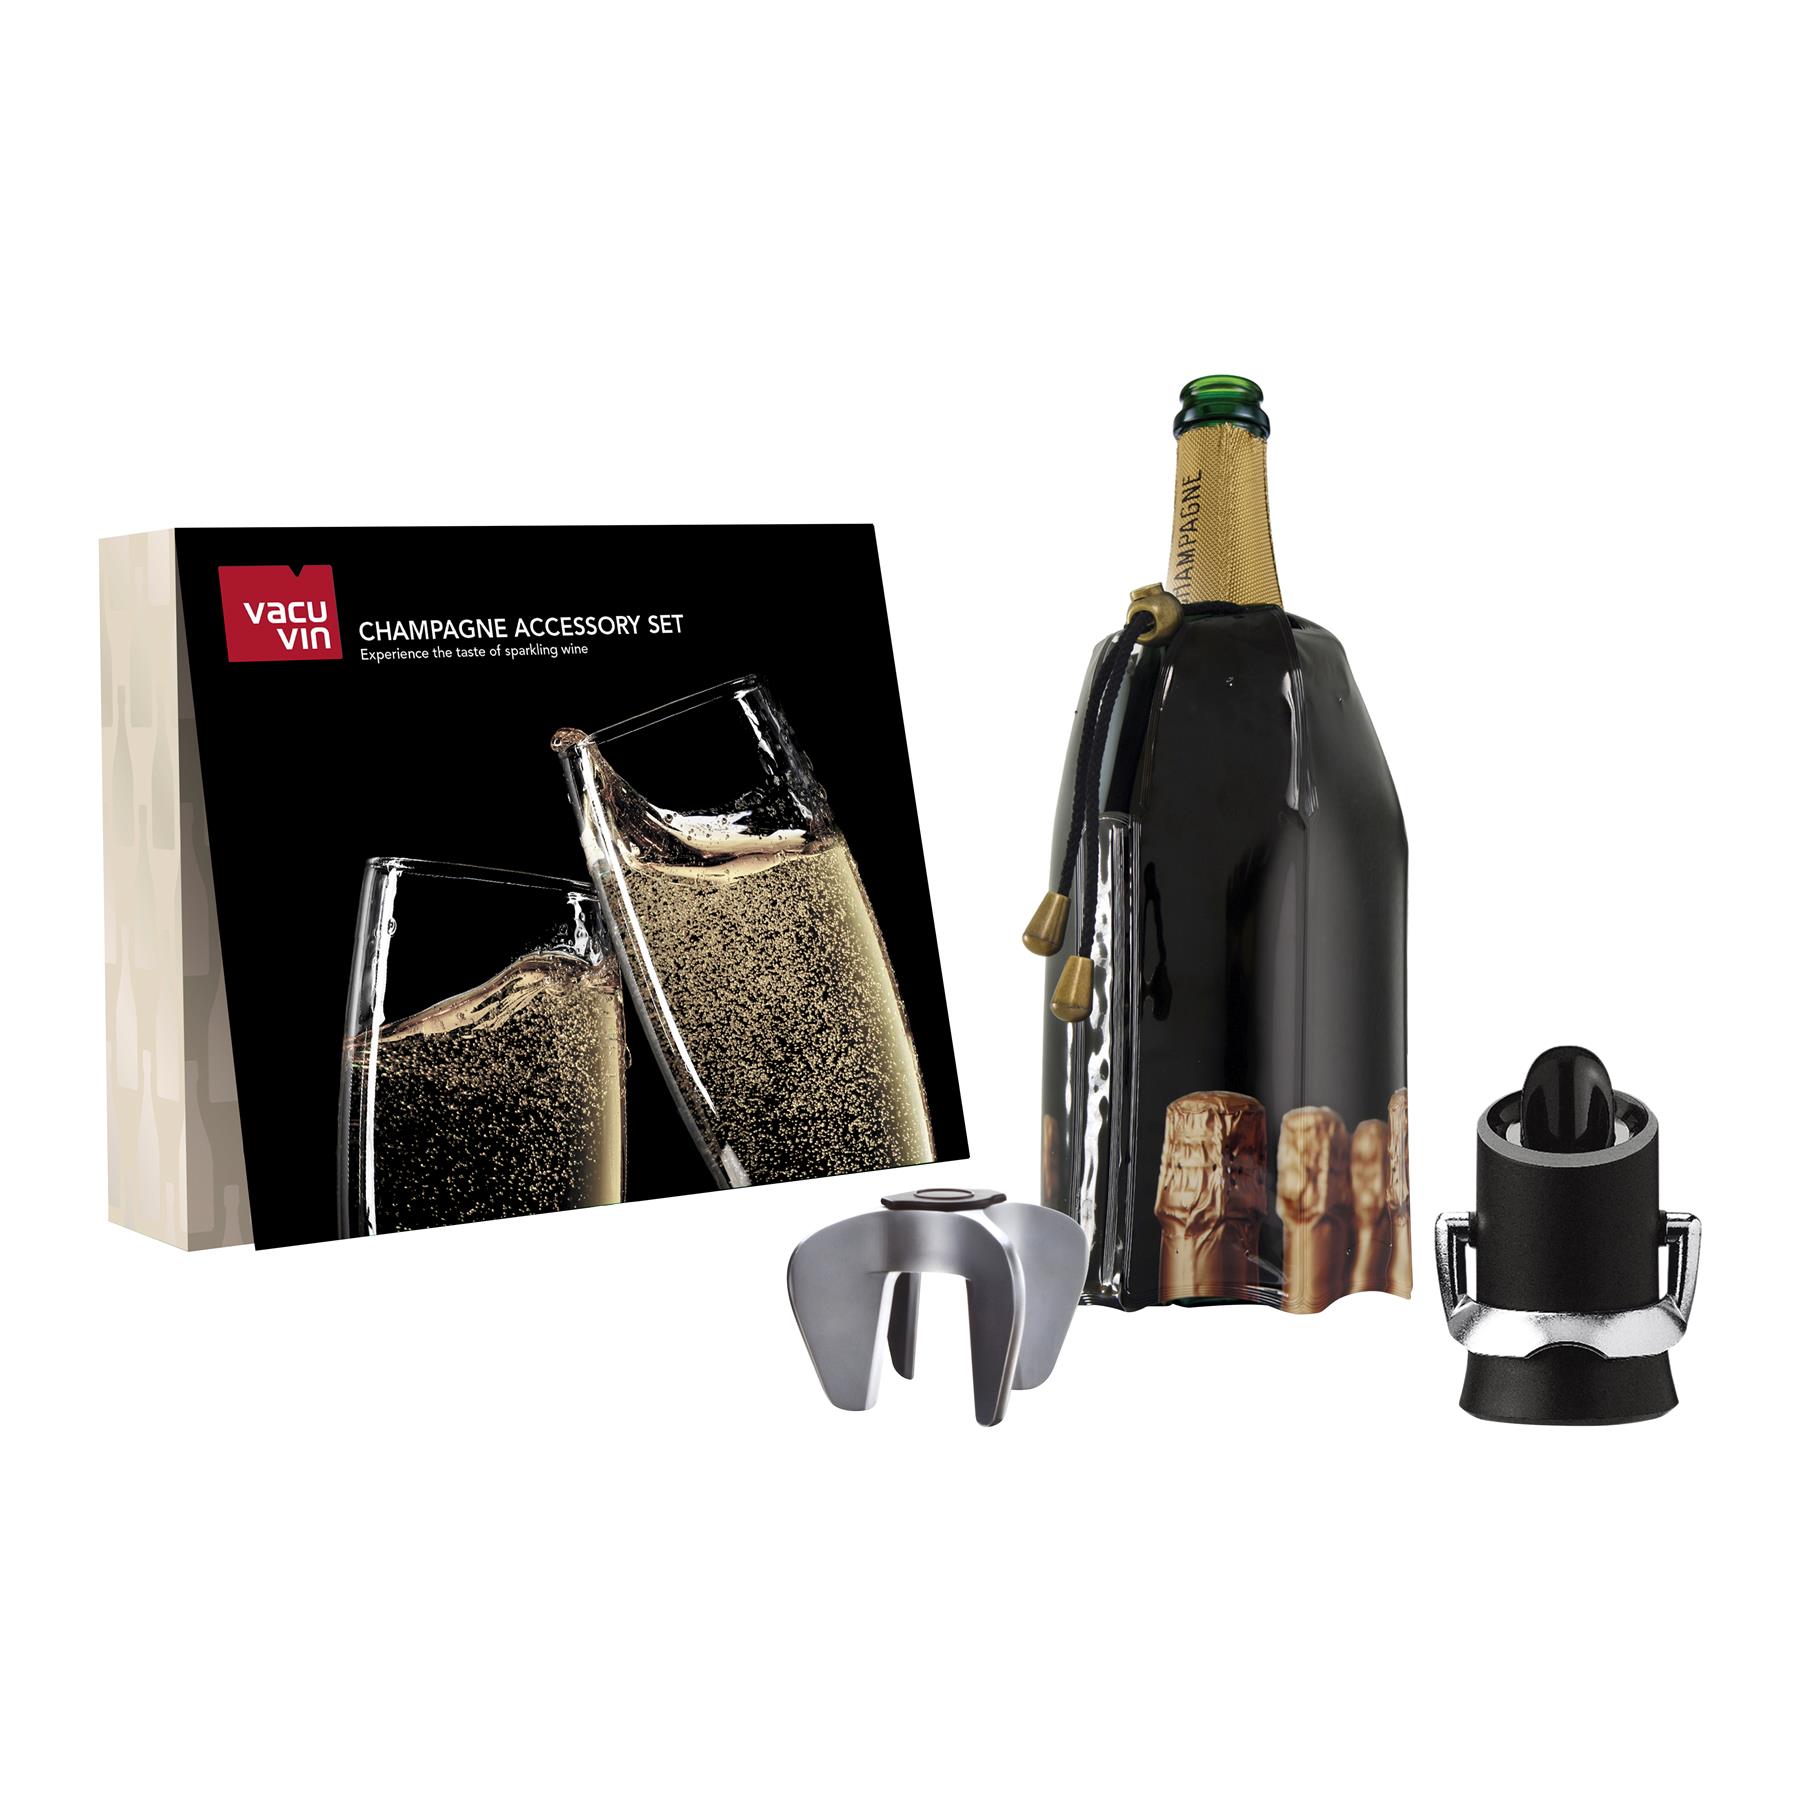 Vacuvin - Champagne Accessory Kit